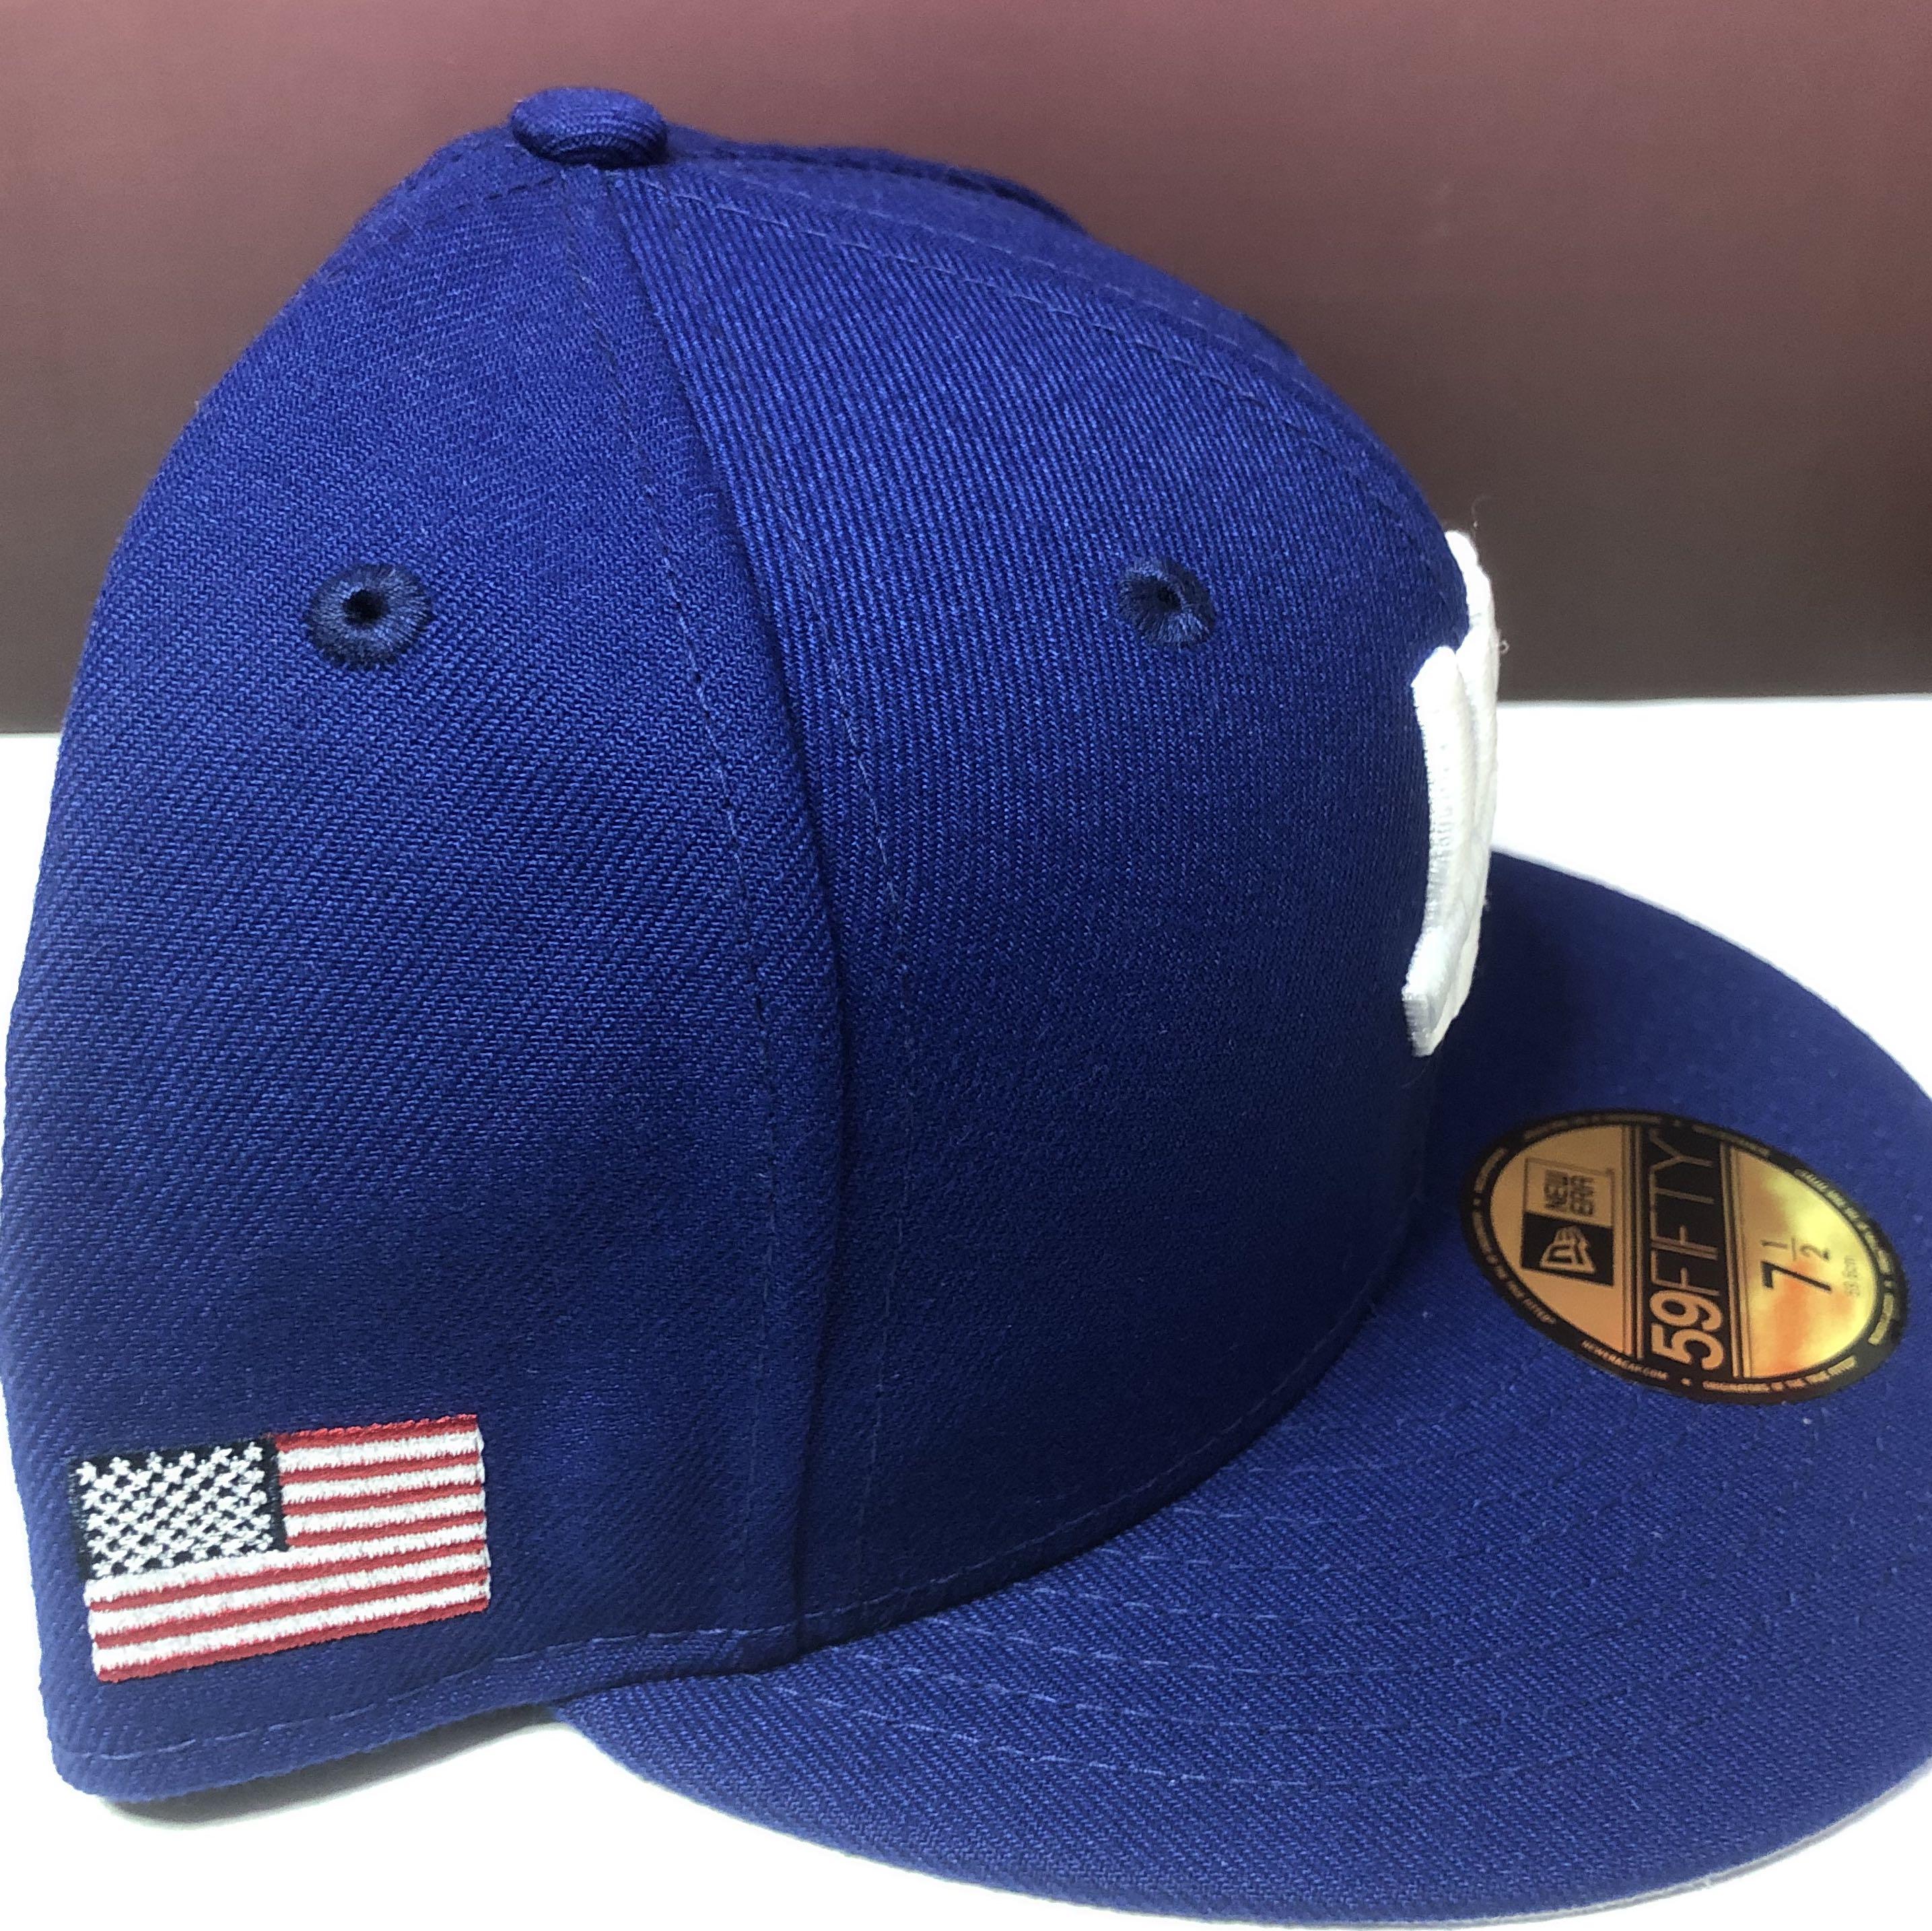 59Fifty 7/1/2 UNDEFEATED new era cap, Men's Fashion, Watches 